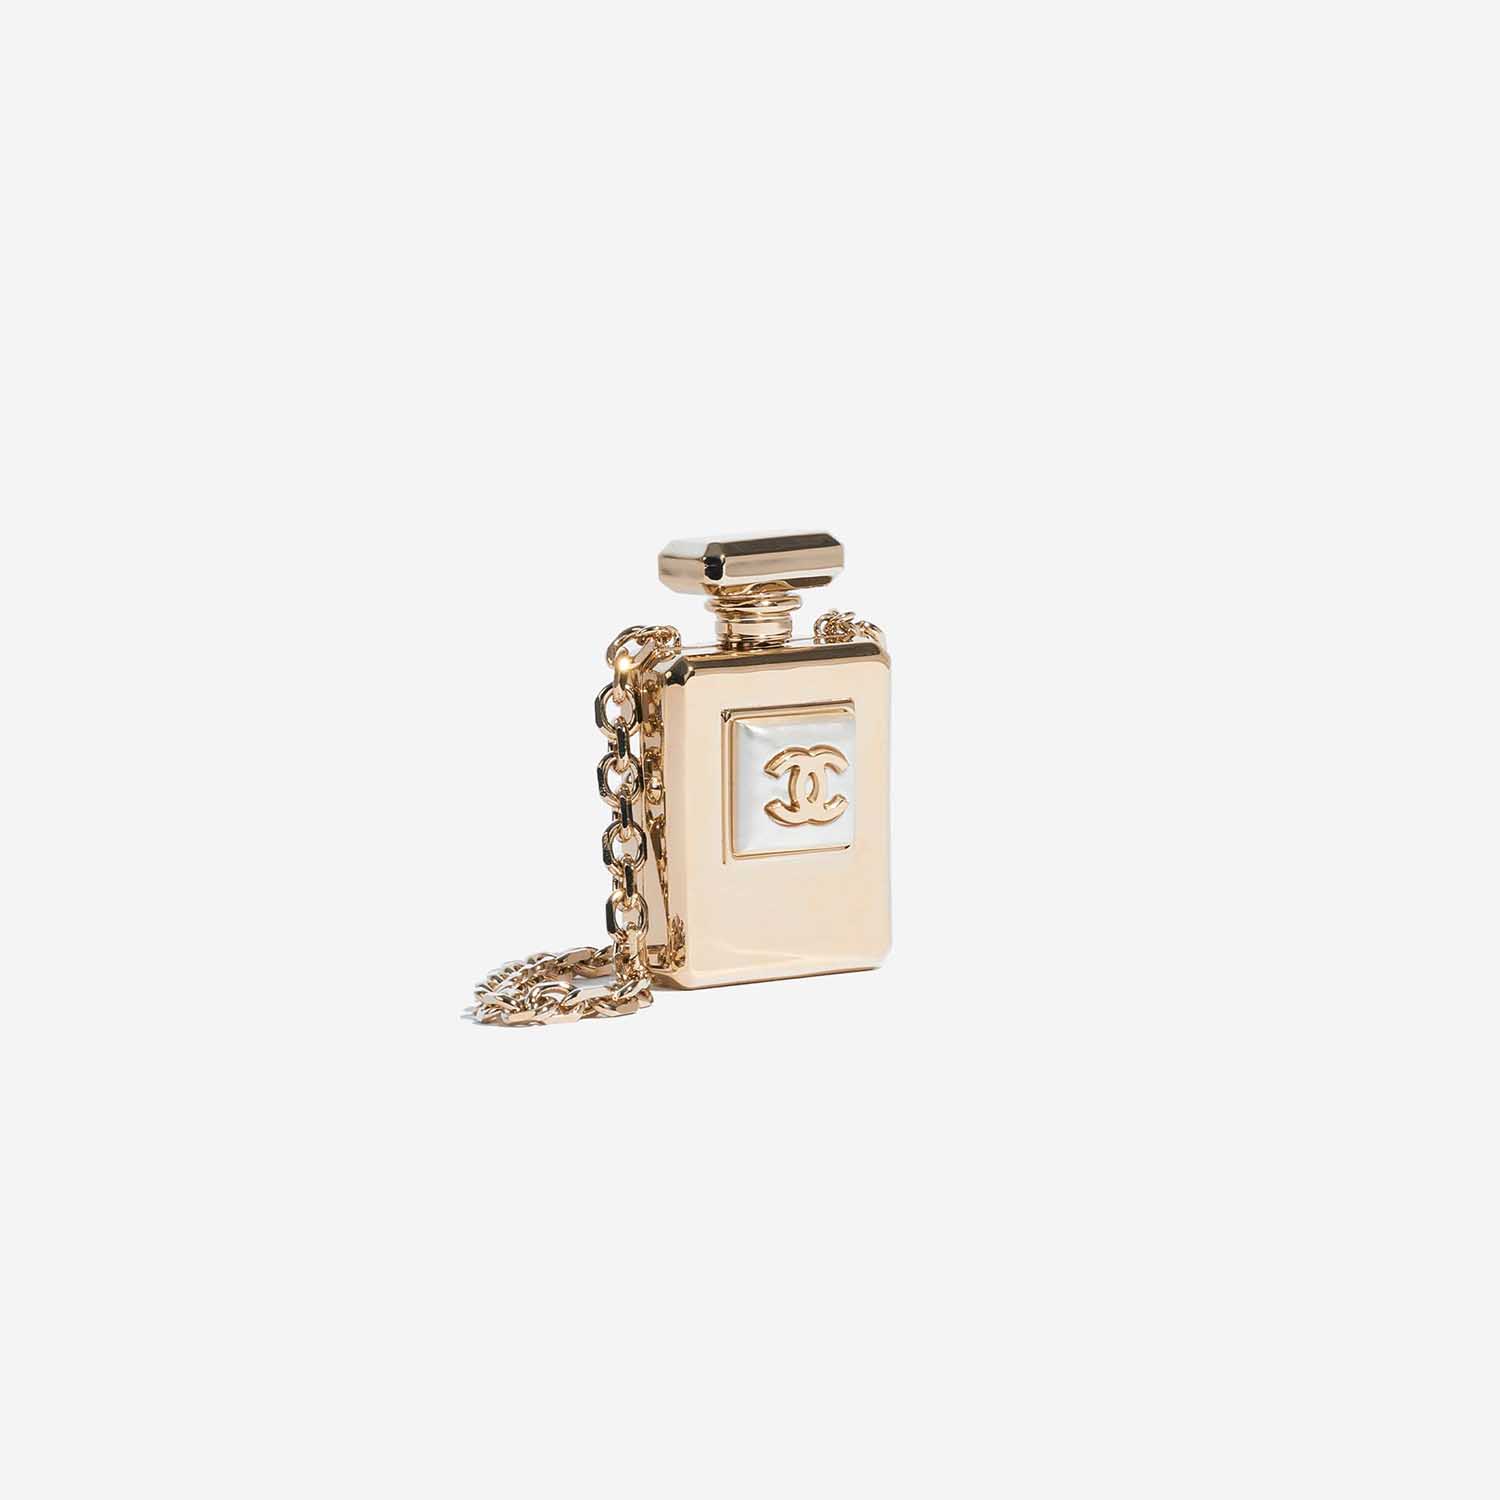 CHANEL, Jewelry, Chanel Perfume Necklace